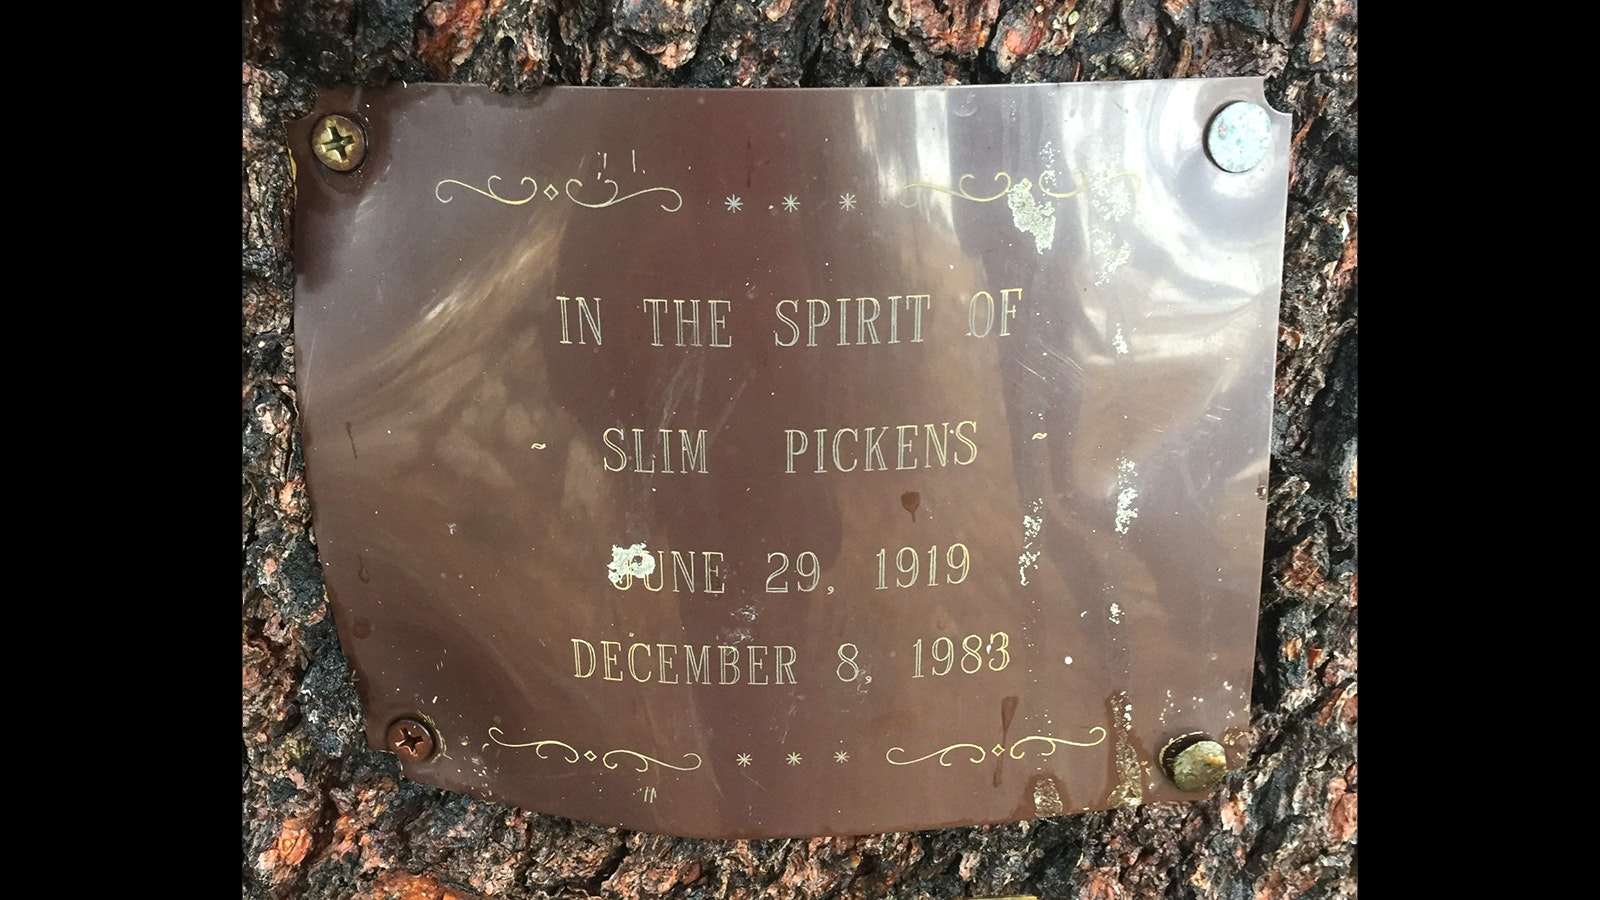 Slim Pickens' ashes are scattered near Wolf Lake in the Wind River Range. A plaque nailed to a tree marks the spot.